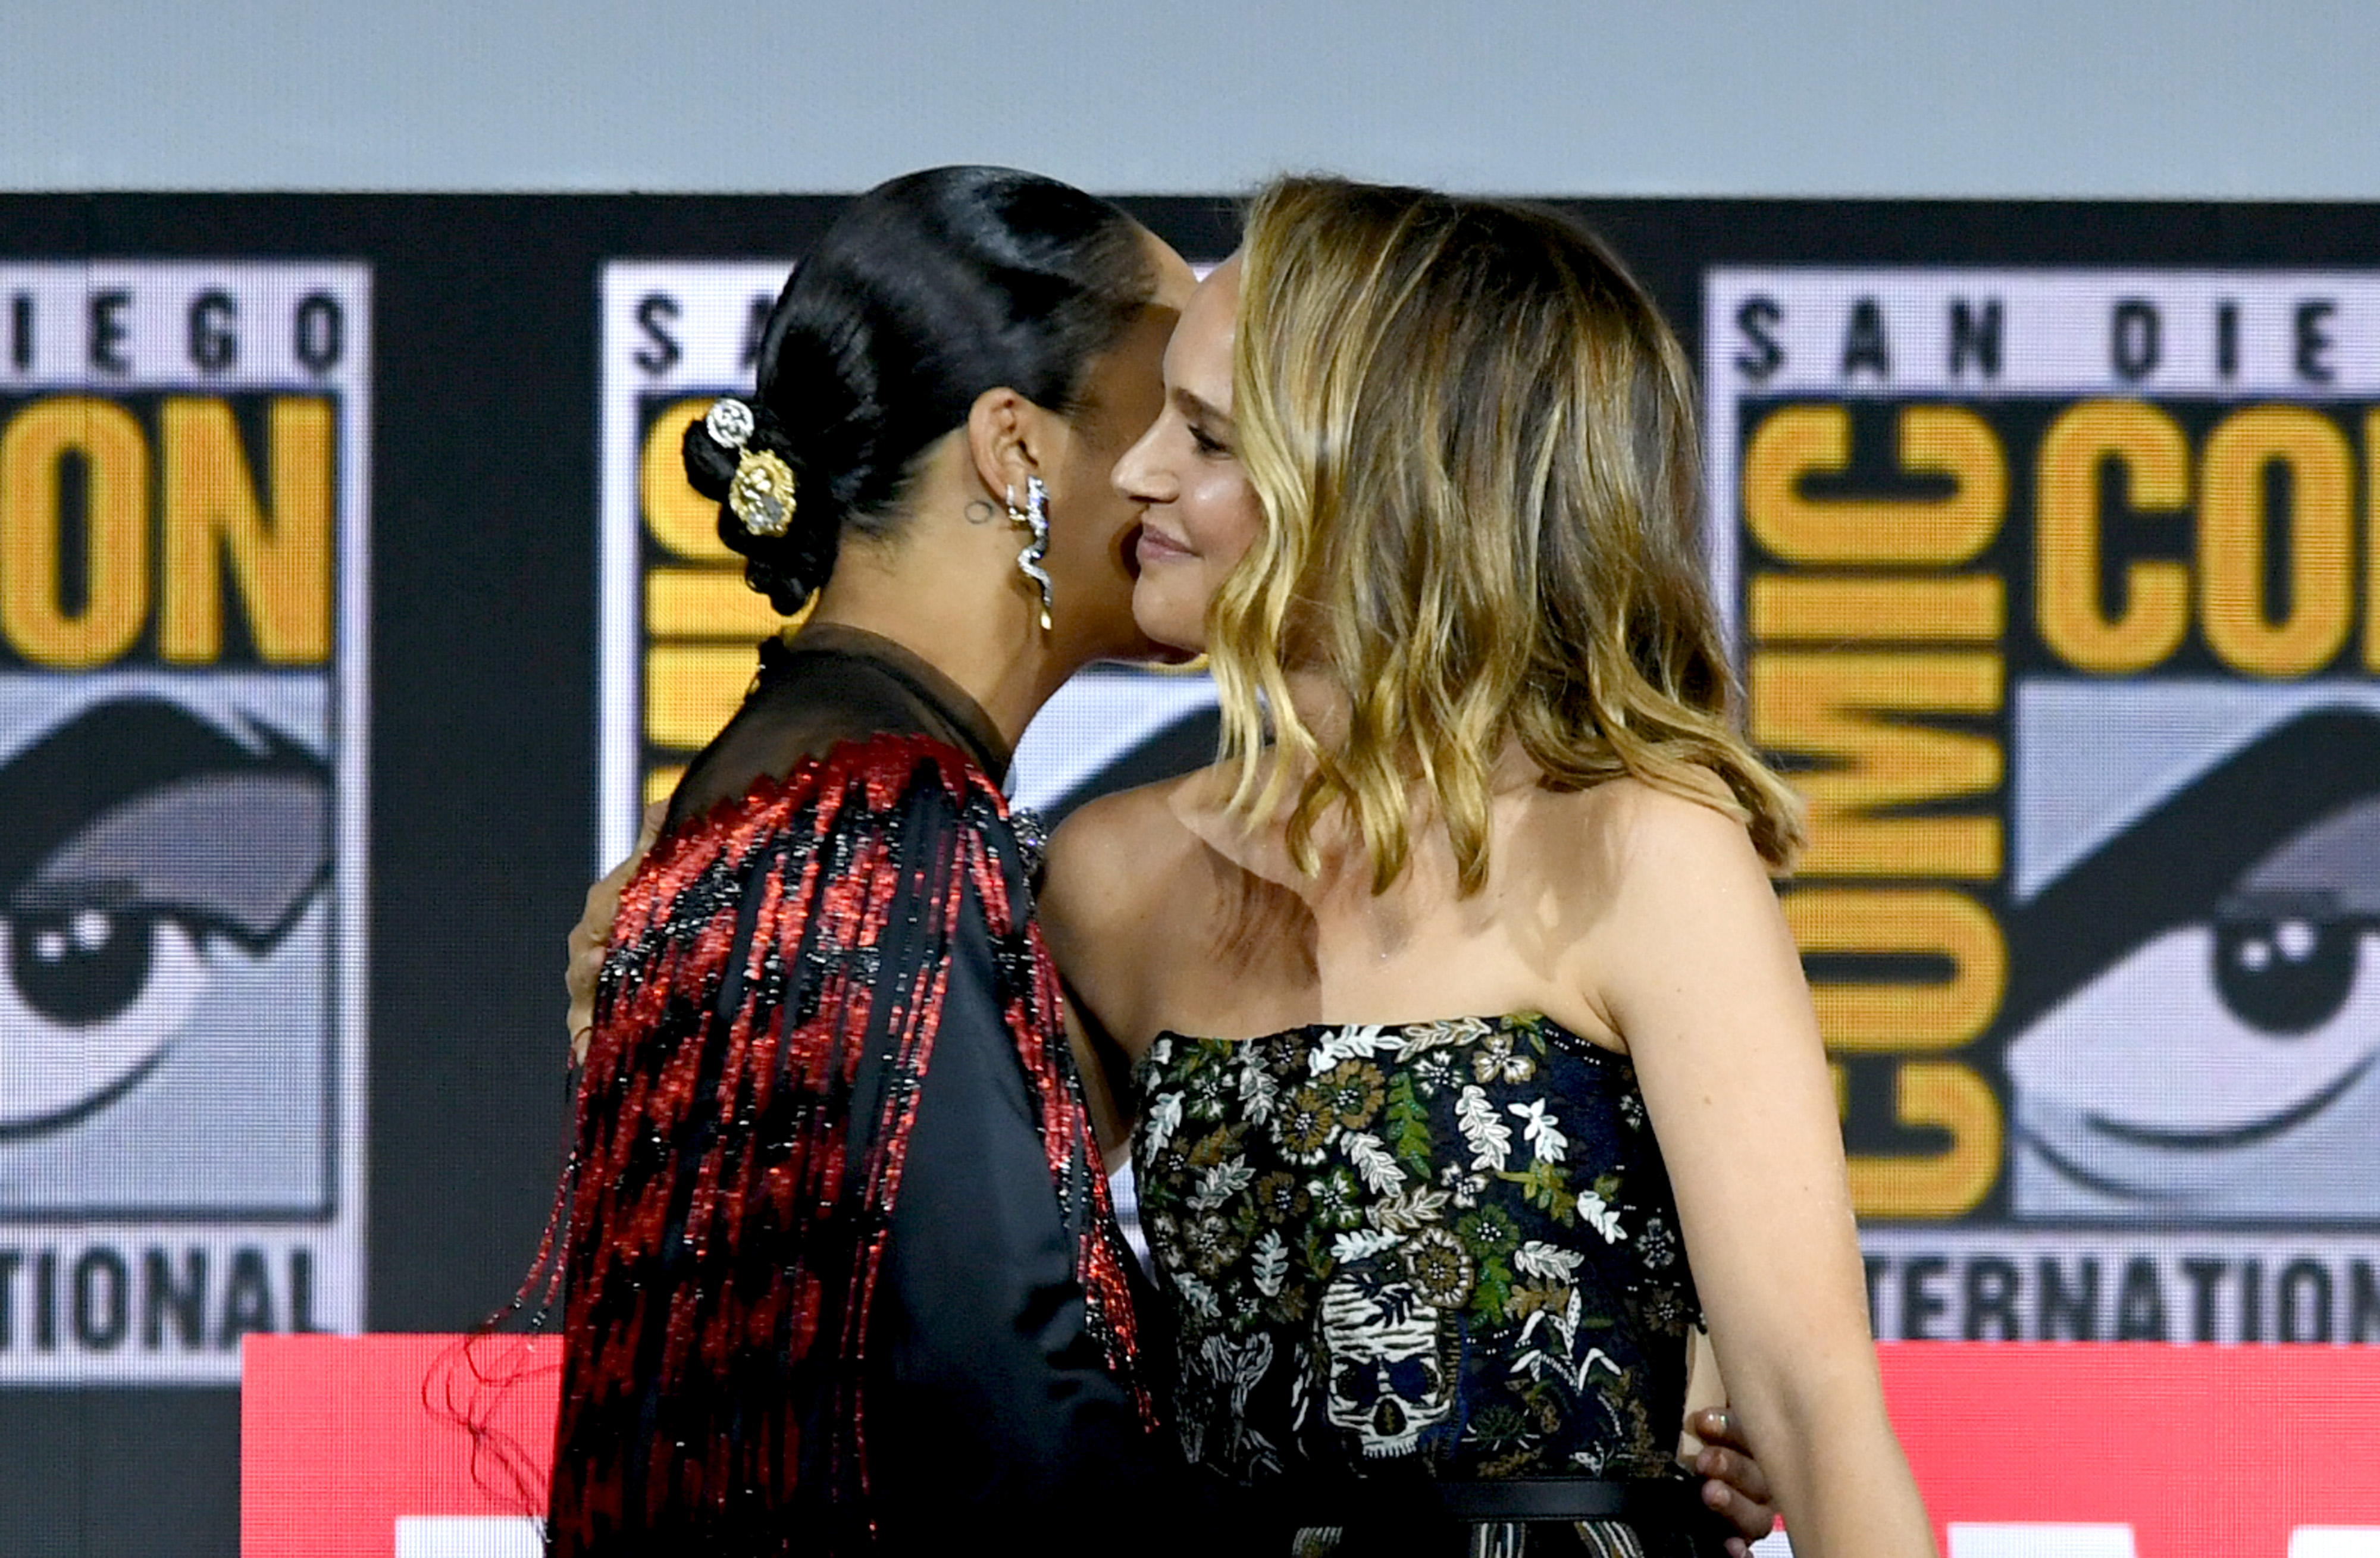 Tessa Thompson and Natalie Portman, who star in 'Thor: Love and Thunder,' embrace onstage at Comic-Con. Thompson wears a black and red sparkly dress. Portman wears a strapless black dress with white and green flowers on it.